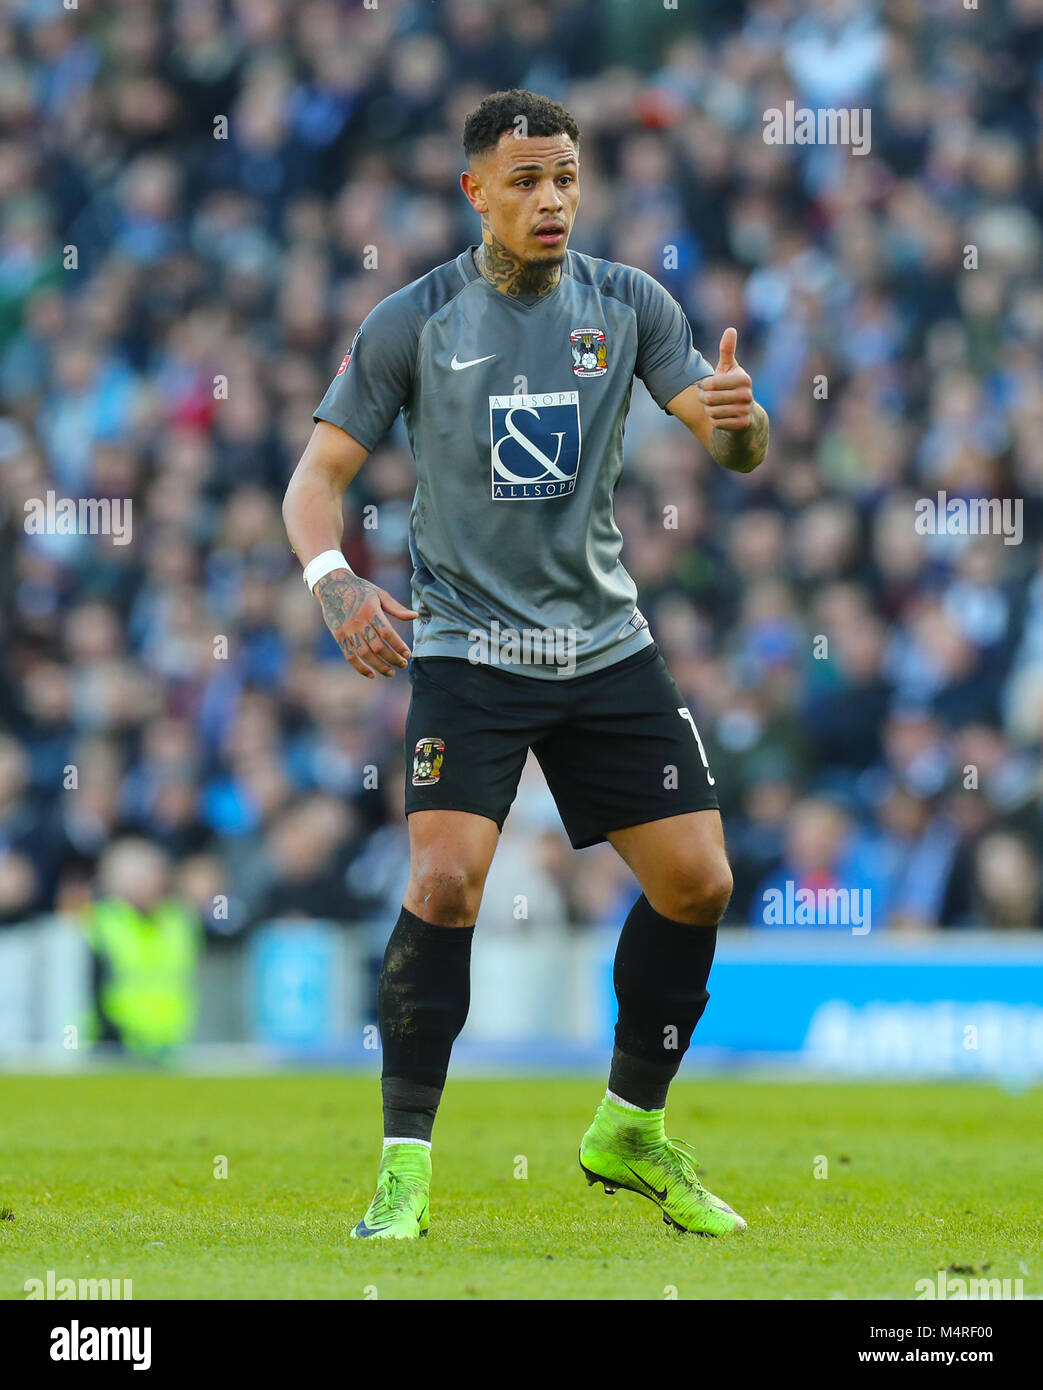 Coventry City's Jonson Clarke-Harris during the Emirates FA Cup, Fifth Round match at The AMEX Stadium, Brighton. PRESS ASSOCIATION Photo. Picture date: Saturday February 17, 2018. See PA story SOCCER Brighton. Photo credit should read: Gareth Fuller/PA Wire. RESTRICTIONS: No use with unauthorised audio, video, data, fixture lists, club/league logos or 'live' services. Online in-match use limited to 75 images, no video emulation. No use in betting, games or single club/league/player publications. Stock Photo